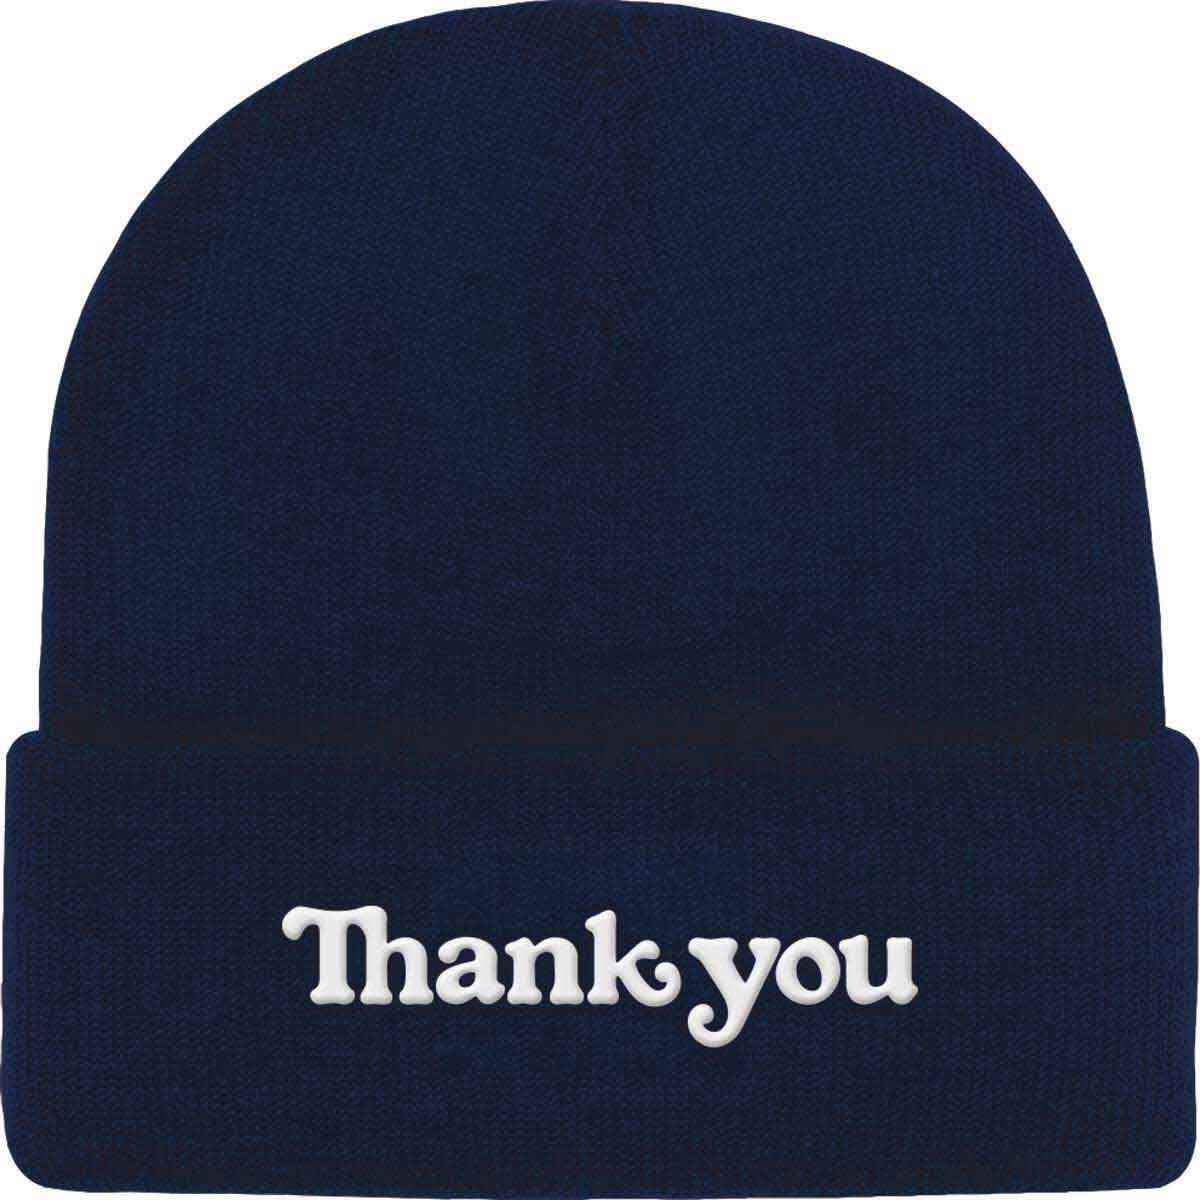 Thank You Center Beanie - Navy - Invisible Board Shop